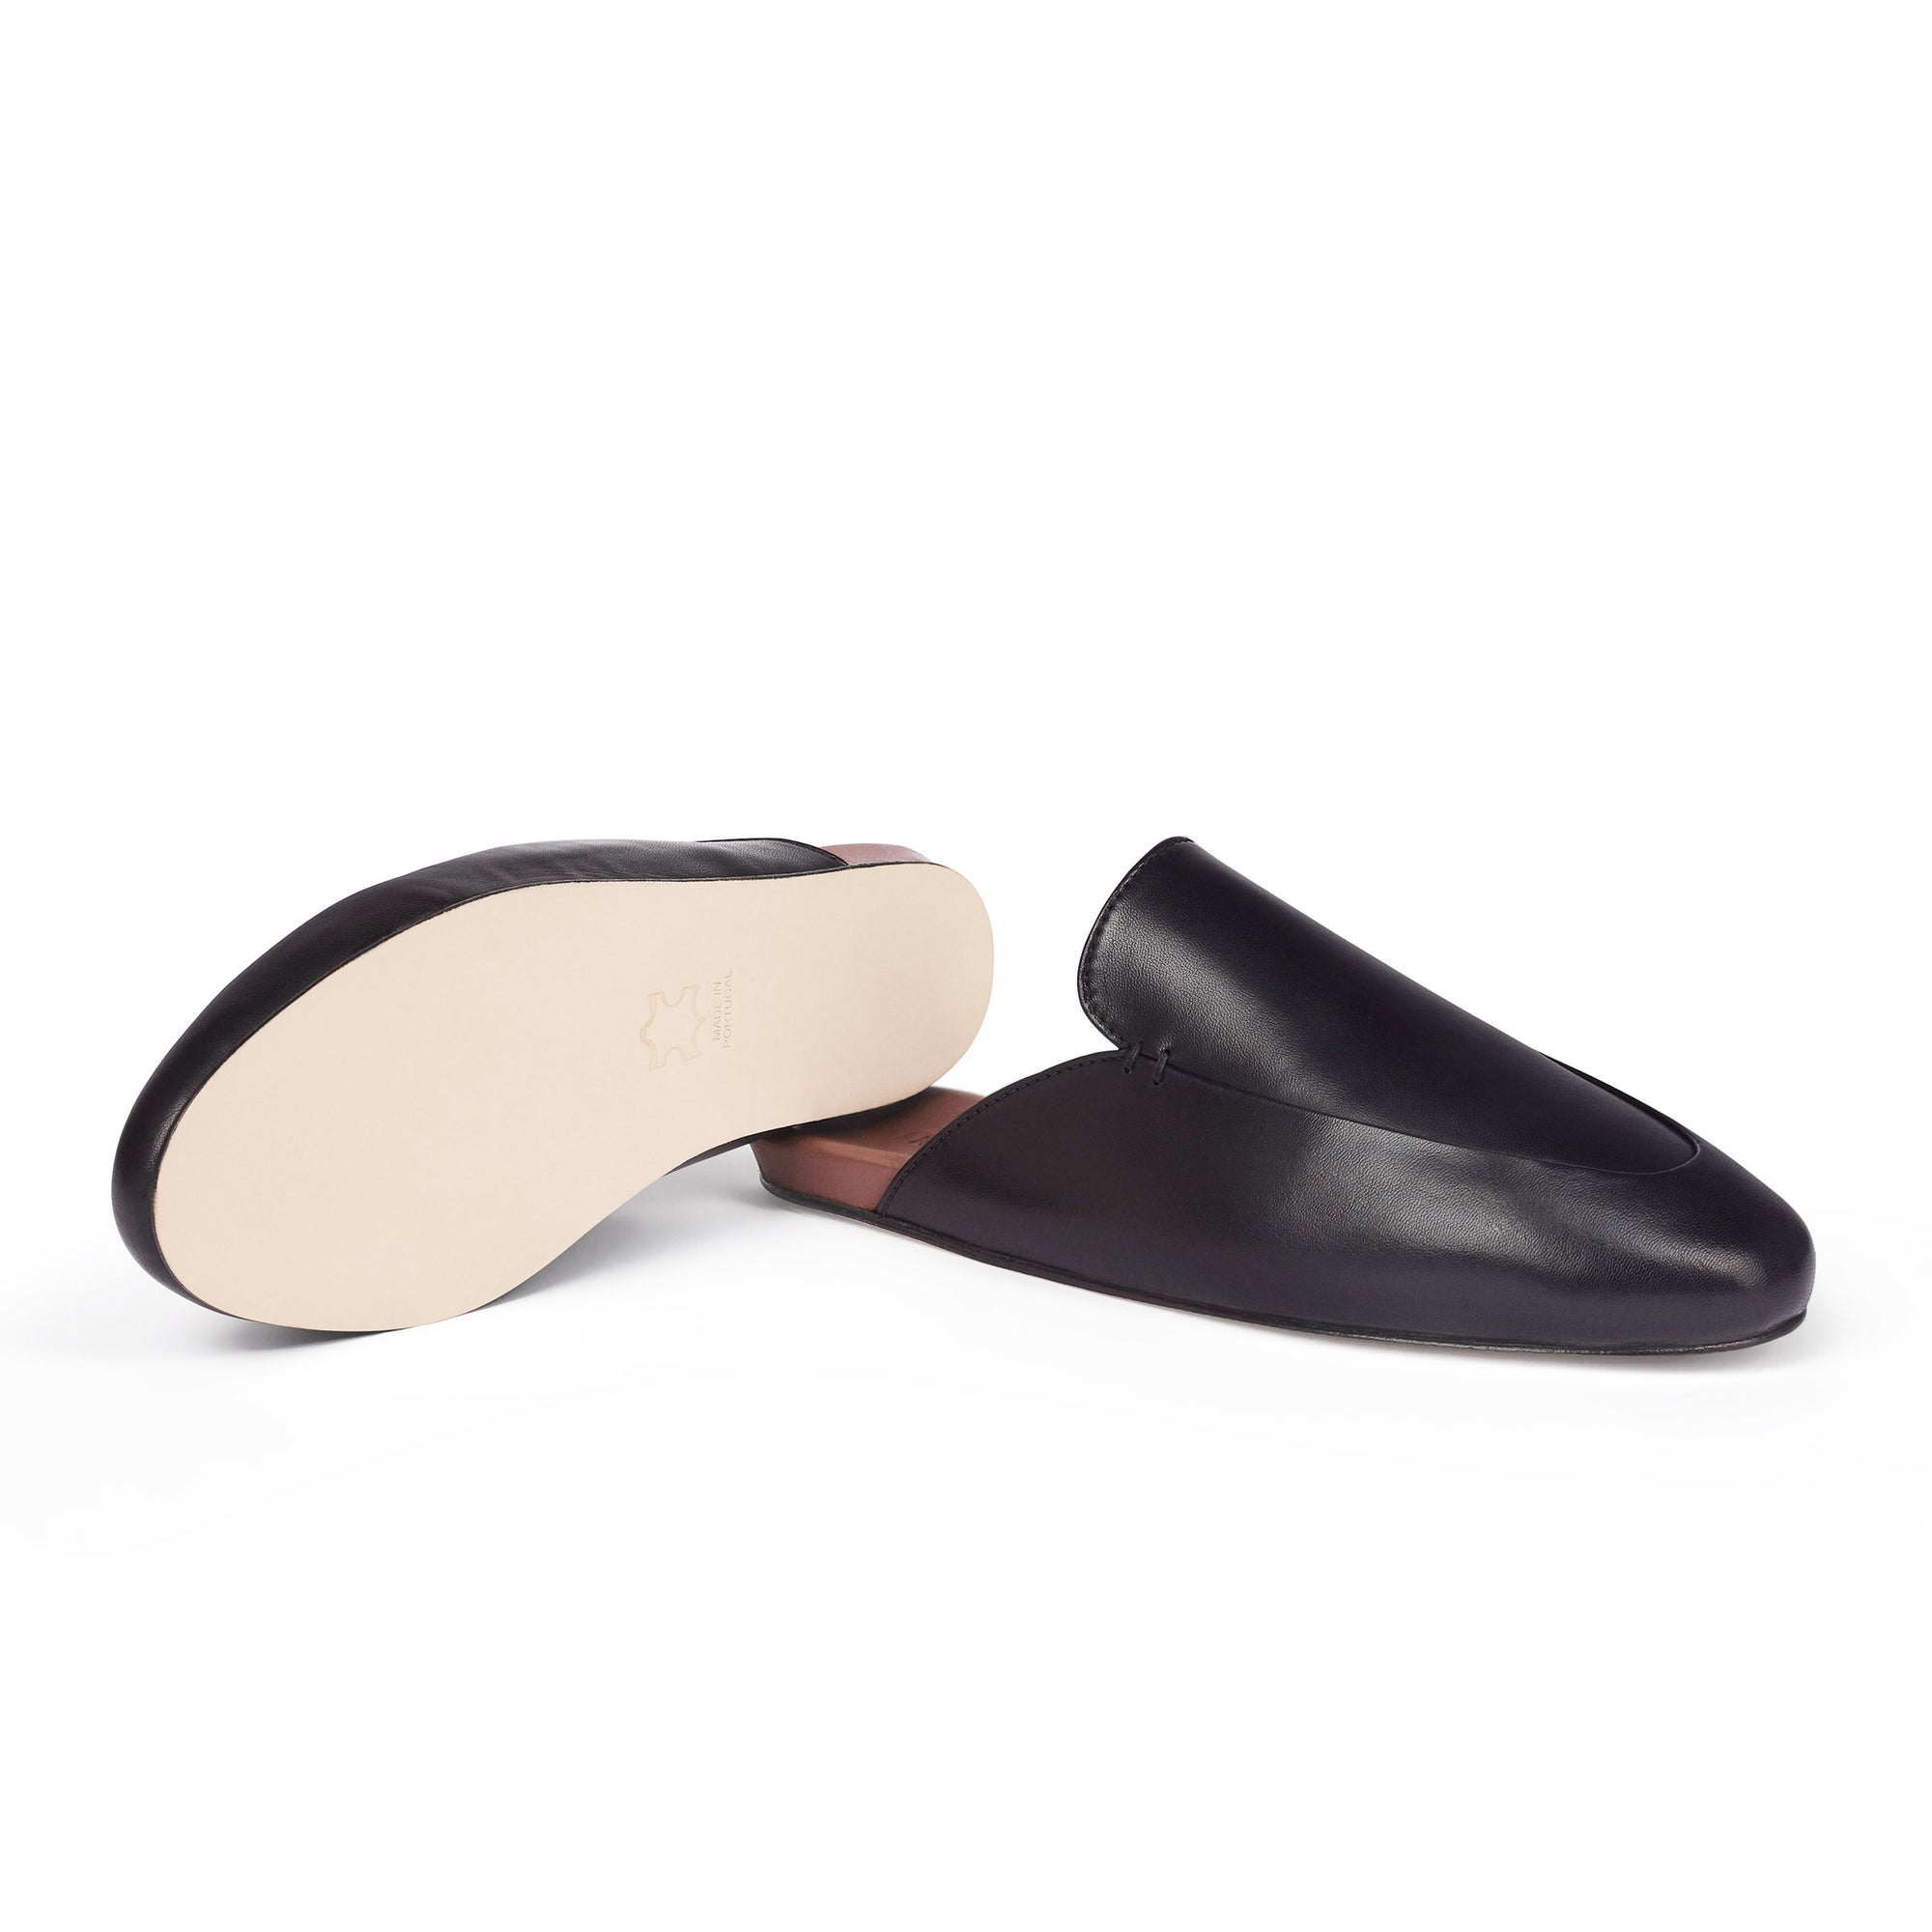 Inabo Women's Slowfer Slipper in black leather and the leather outer sole